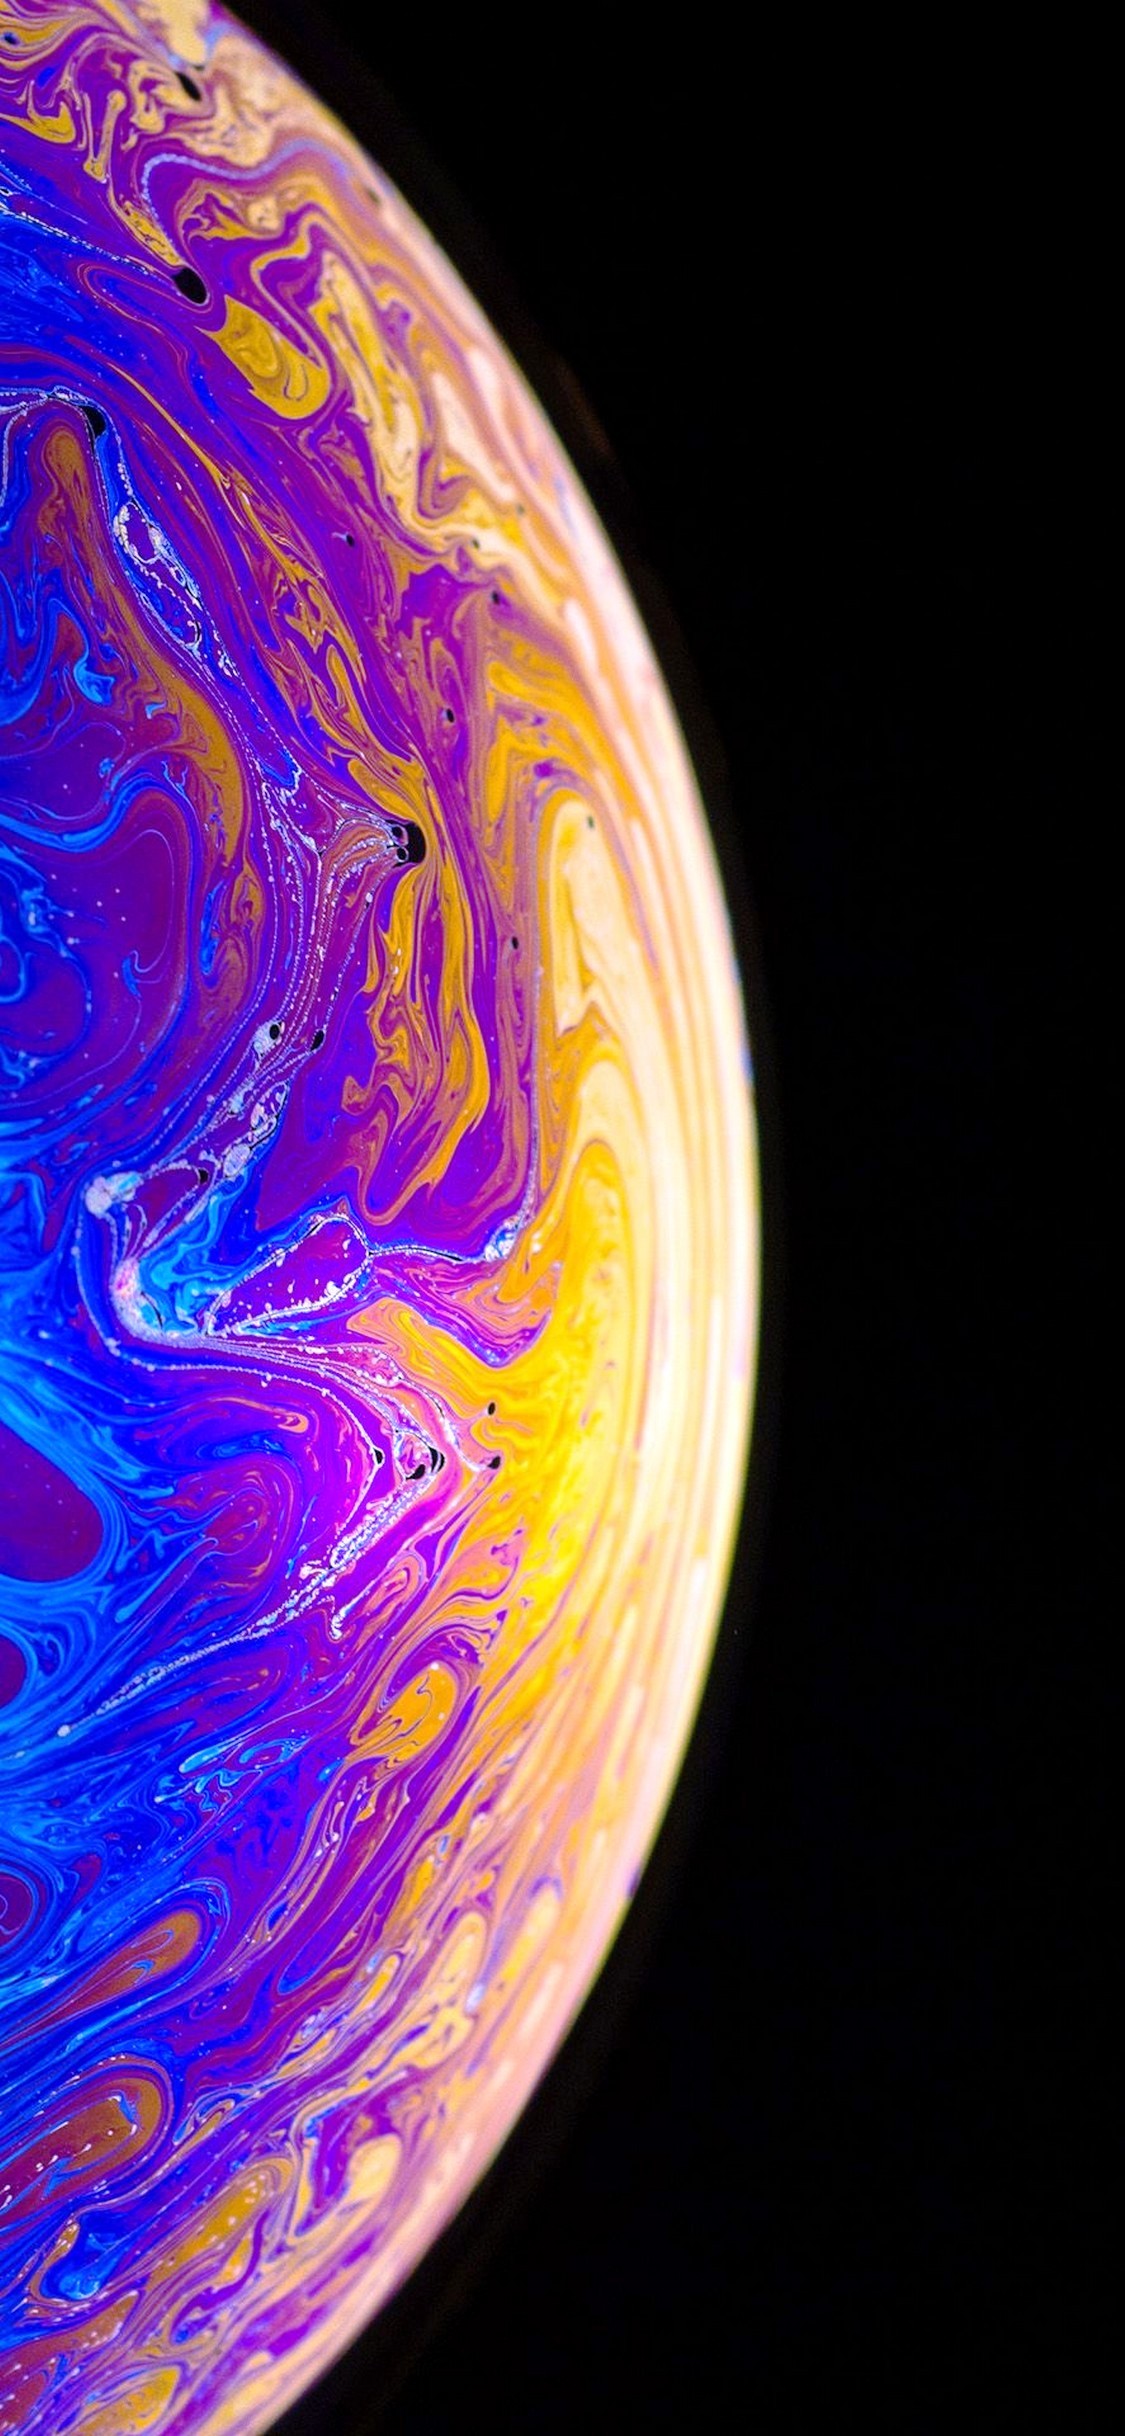 iPhone XS Wallpaper Design with high-resolution 1125x2436 pixel. You can use this wallpaper for your iPhone 5, 6, 7, 8, X, XS, XR backgrounds, Mobile Screensaver, or iPad Lock Screen